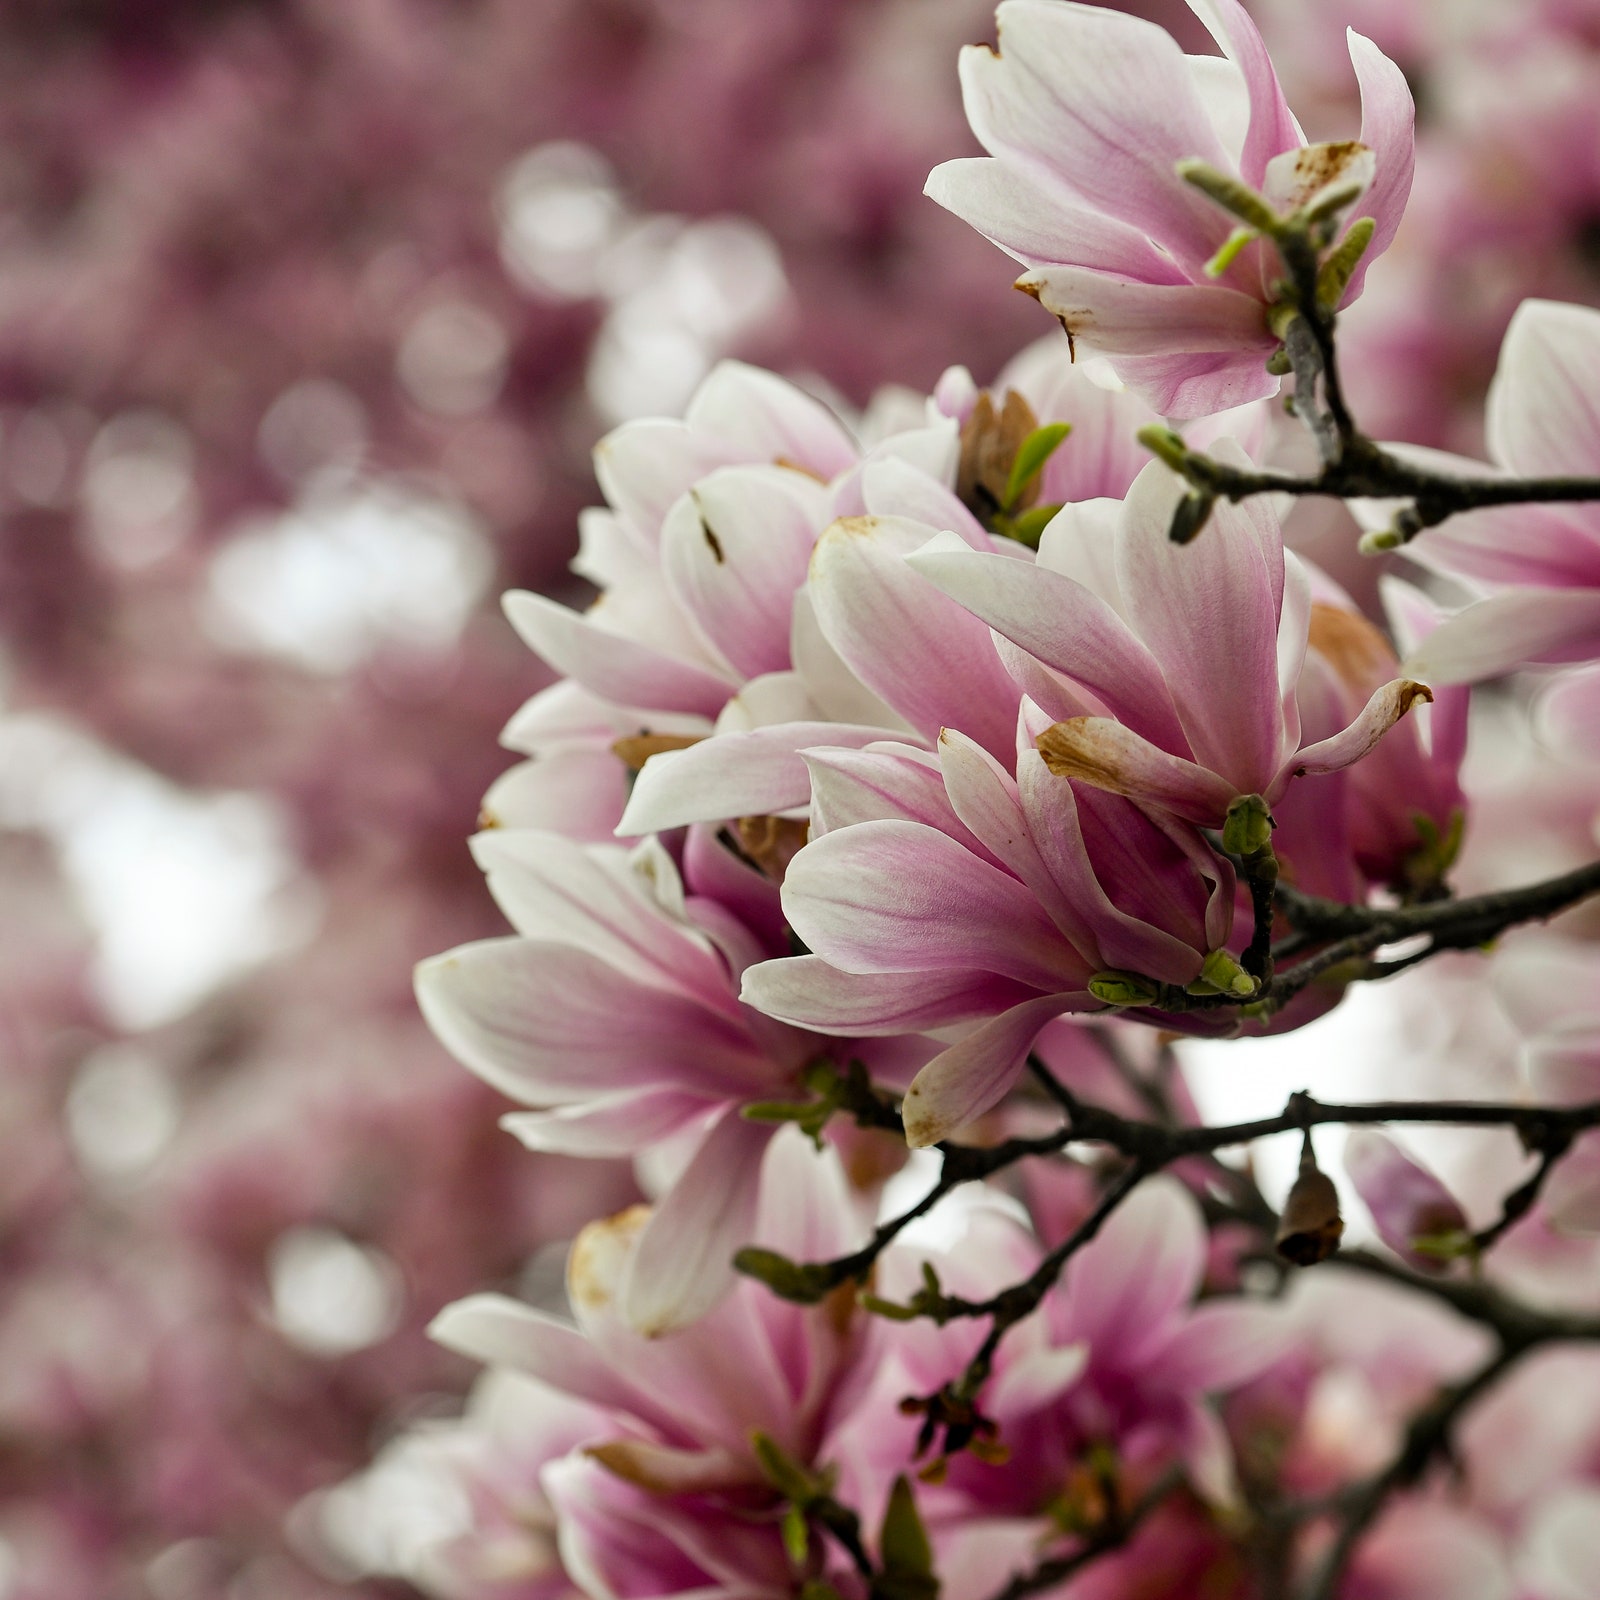 An in-depth guide to magnolias and how to plant them for beautiful blooms